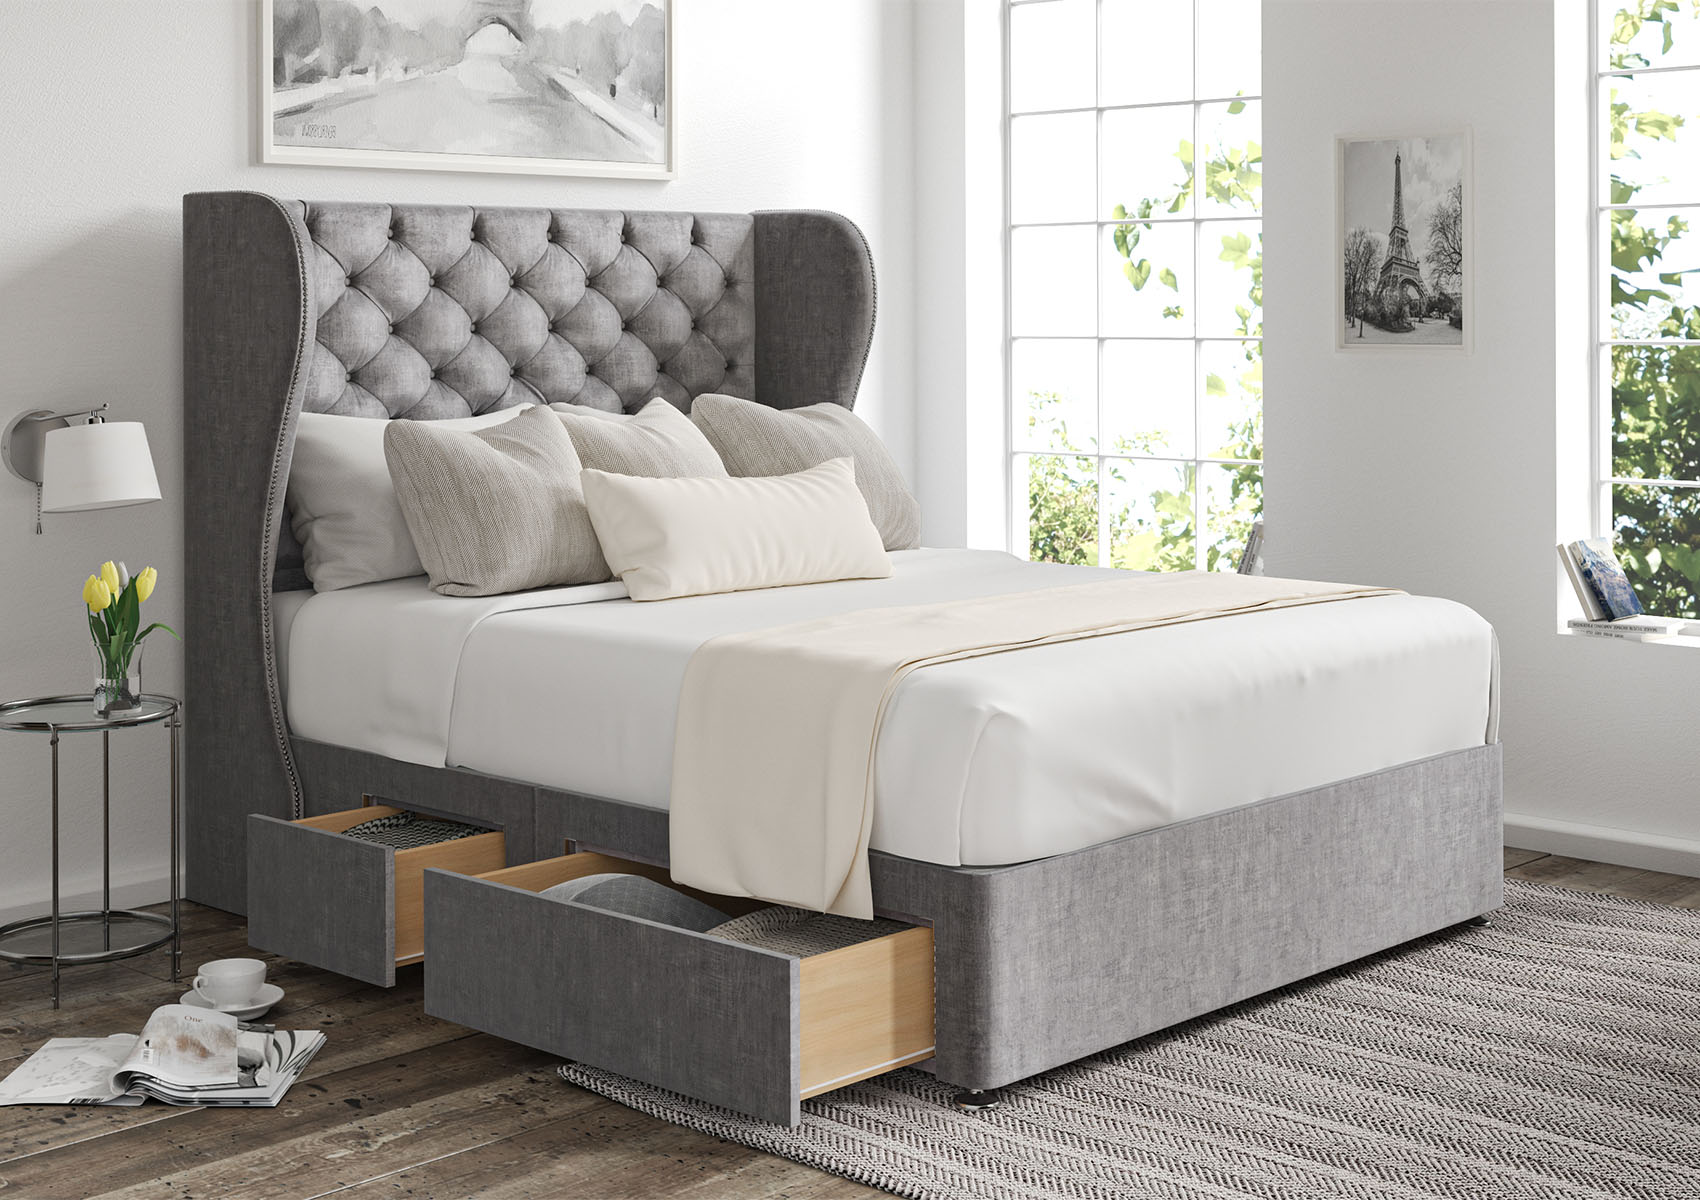 View Miami Carina Parchment Upholstered King Size Winged Bed Time4Sleep information